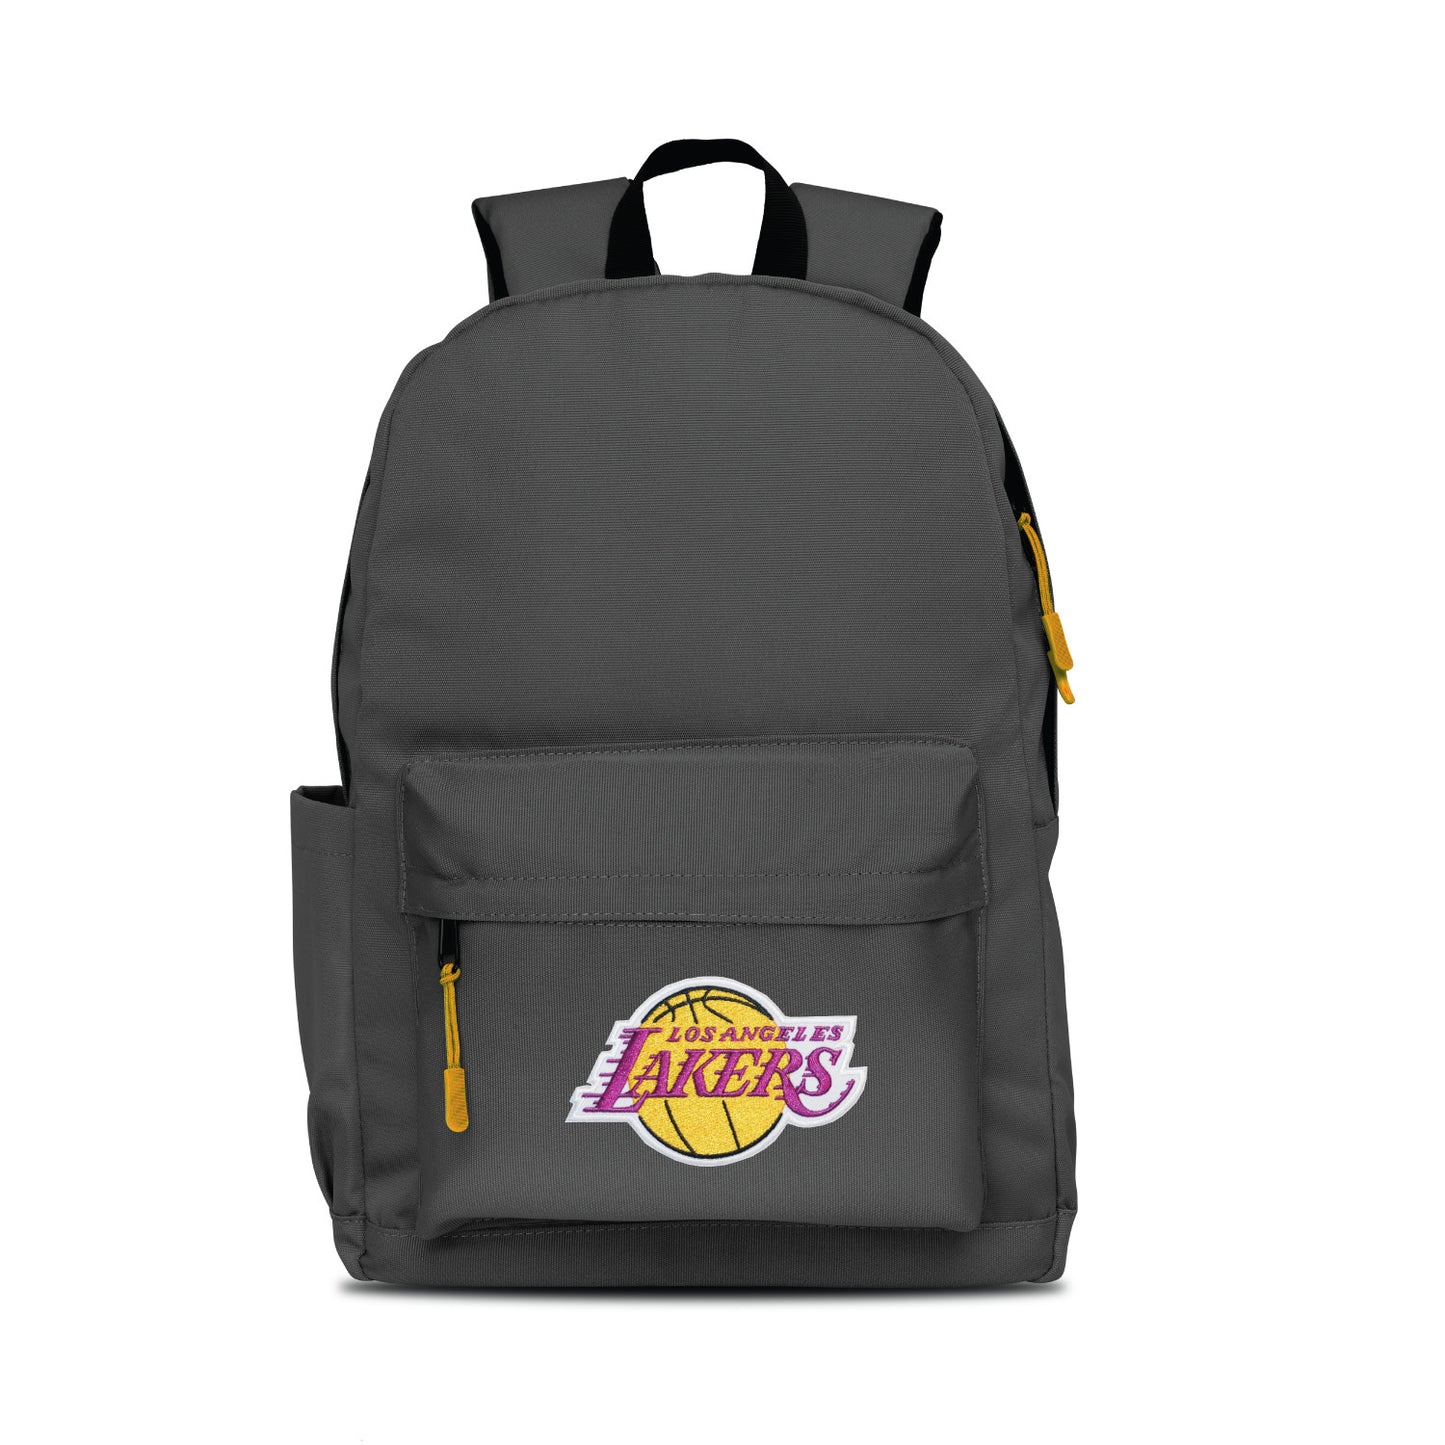 Los Angeles Lakers Campus Laptop Backpack - Gray